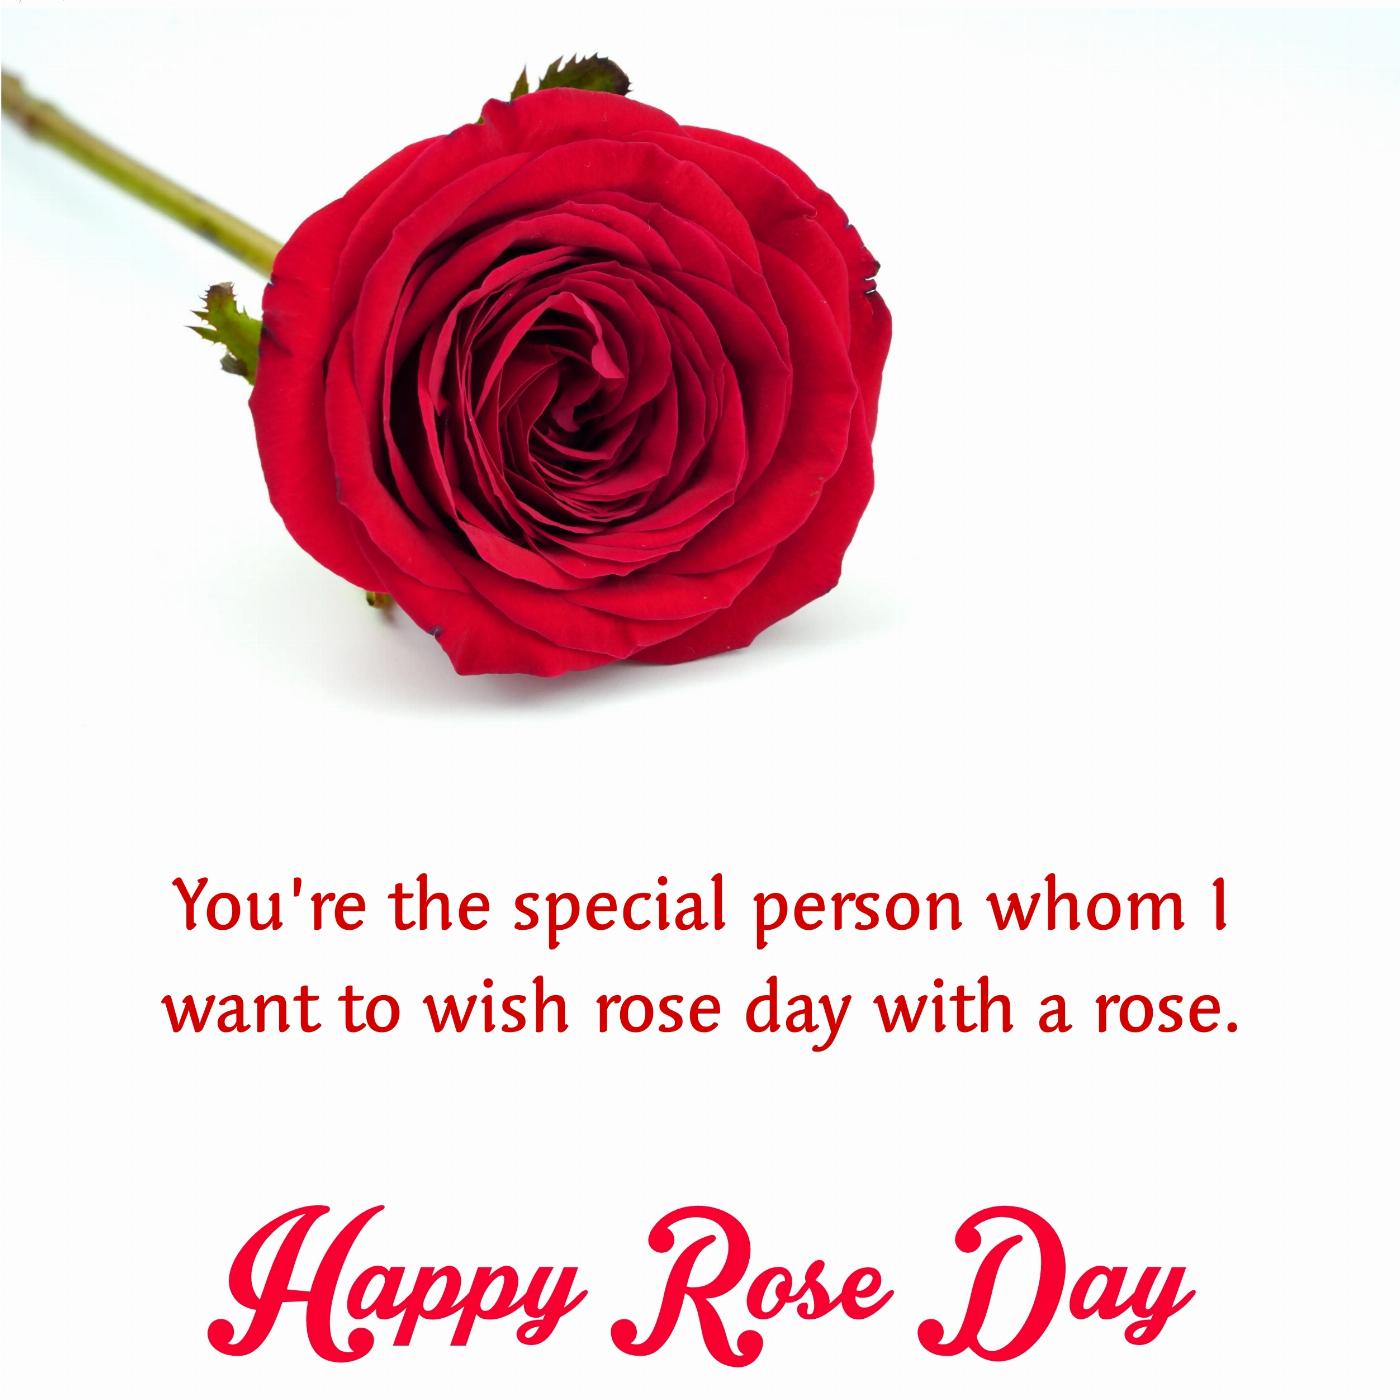 Youre the special person whom I want to wish rose day with a rose